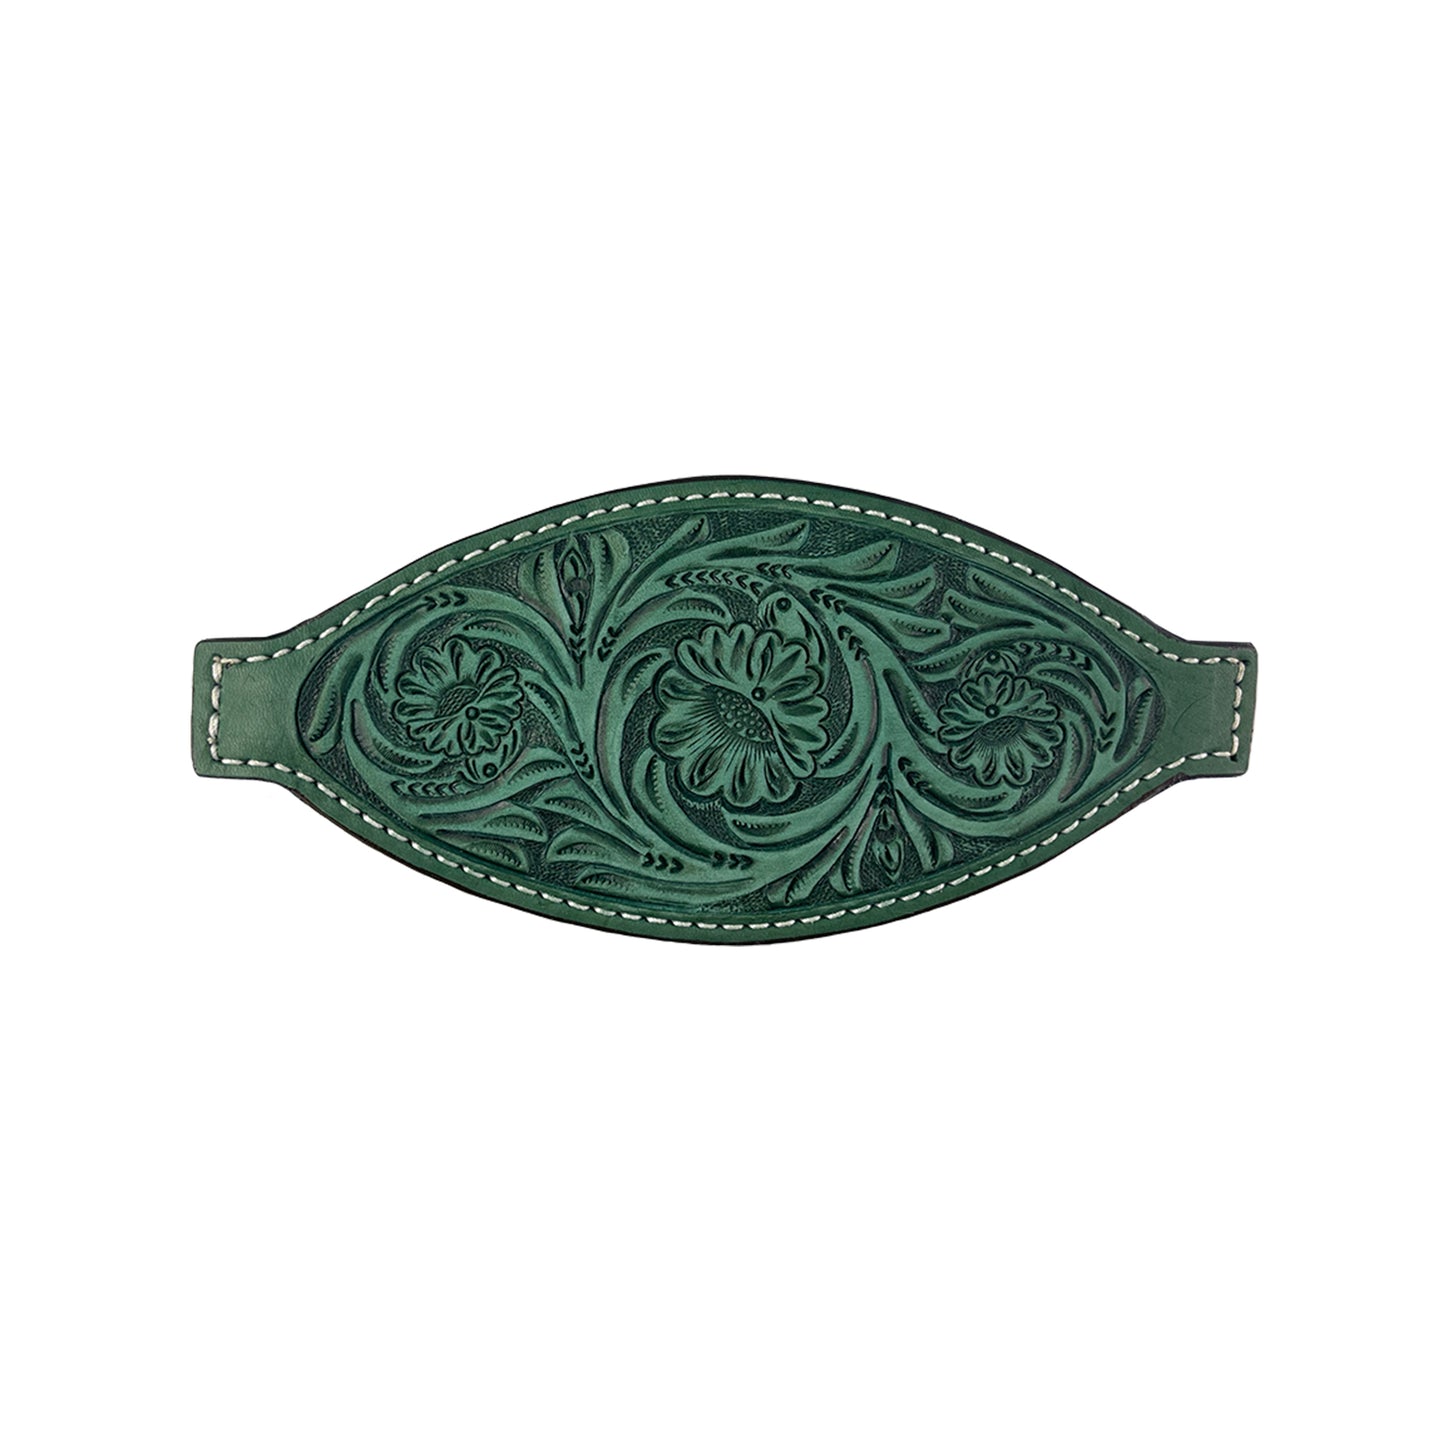 Bronc nose rough out turquoise leather floral tooled (color may vary).